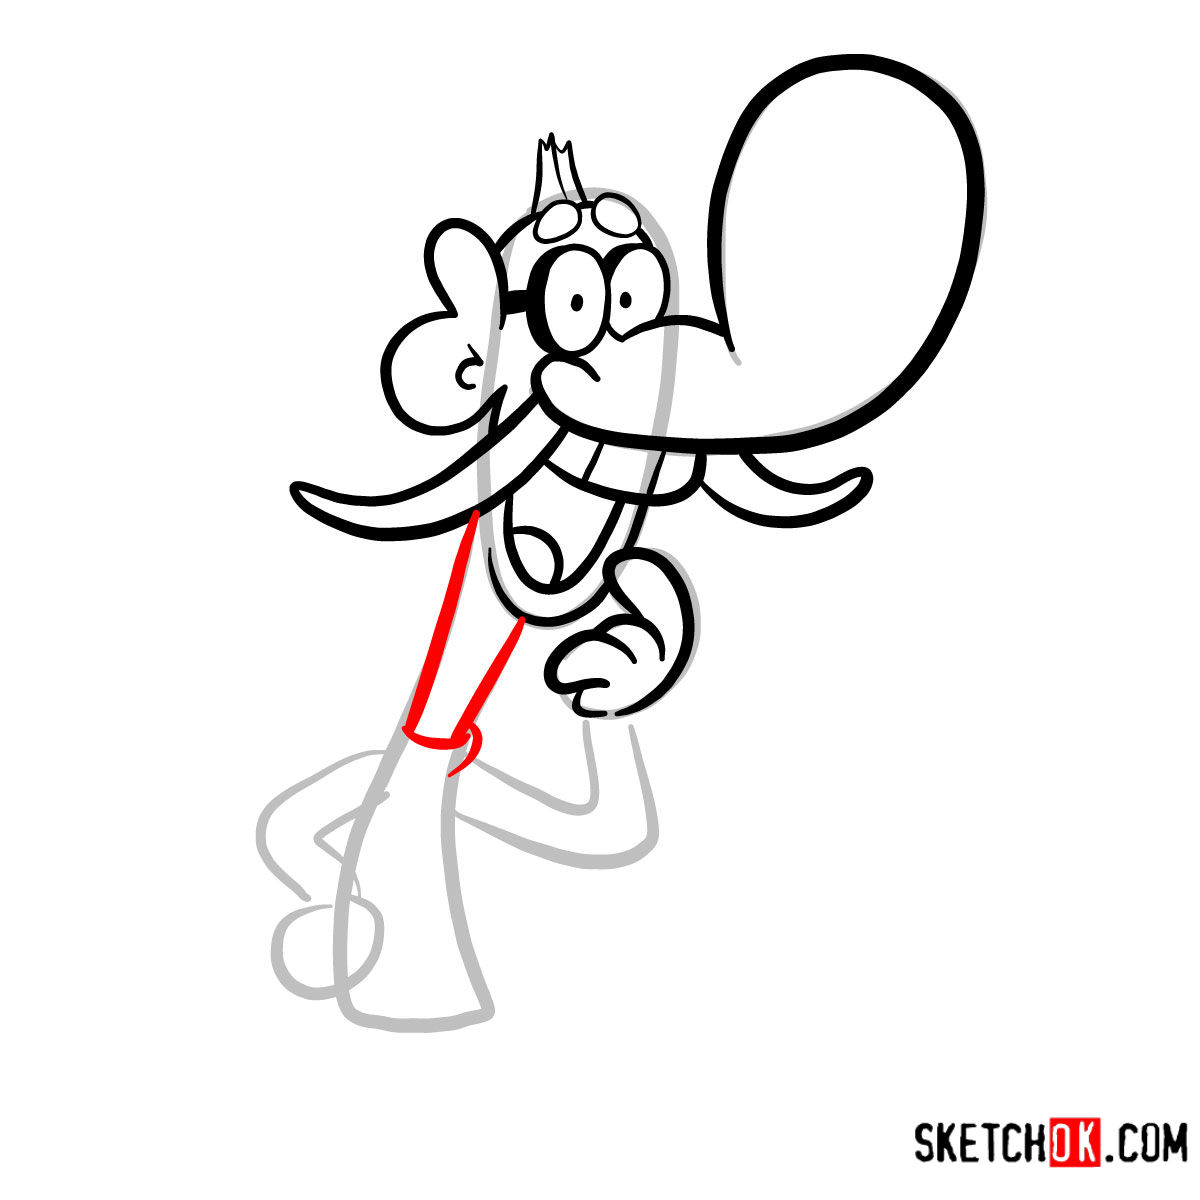 How to draw Mung Daal from Chowder series - step 06